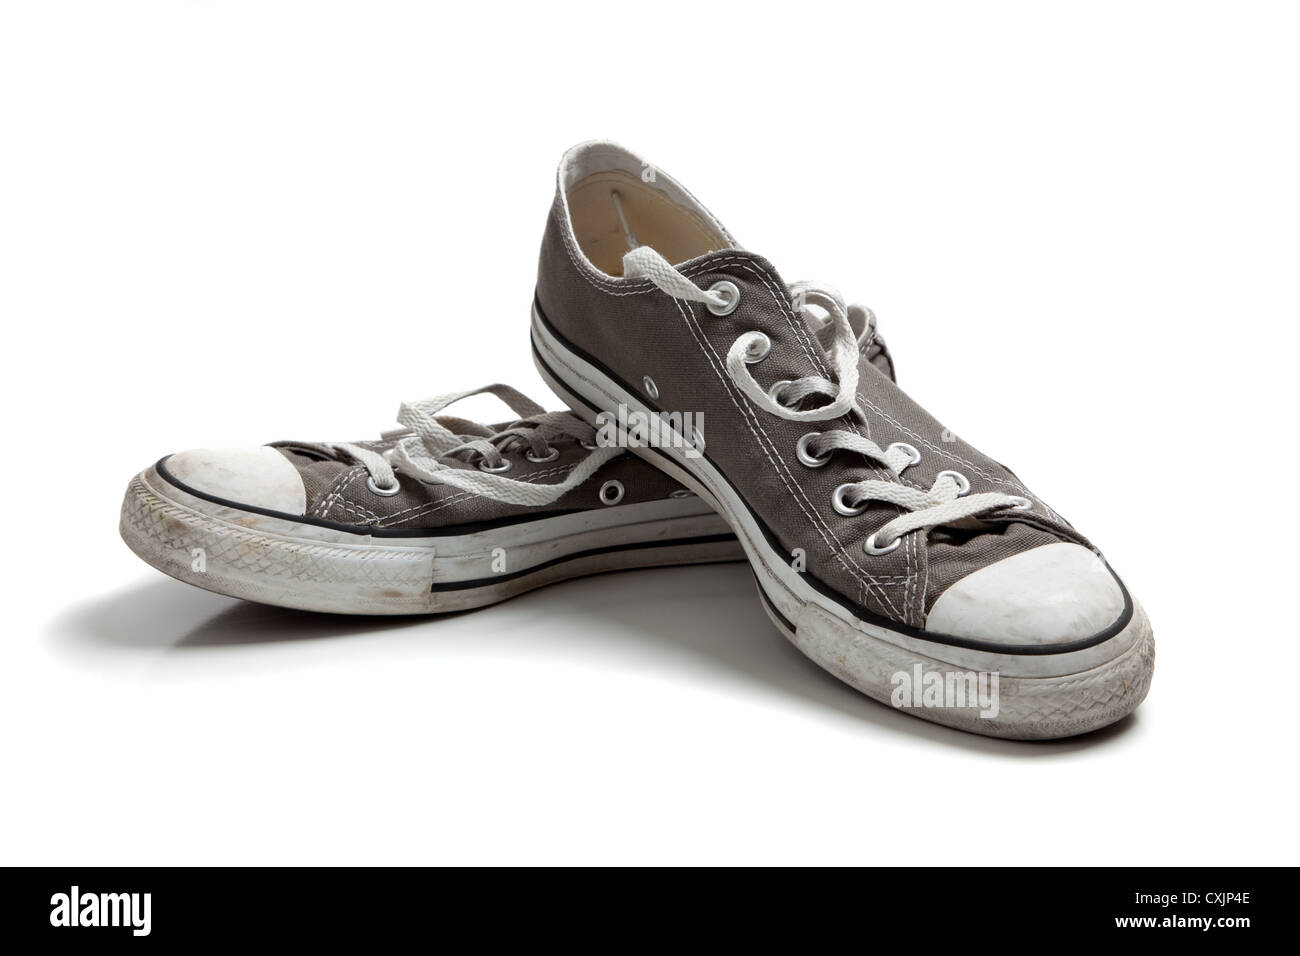 Pair of old, retro gray sneakers on a white background Stock Photo - Alamy